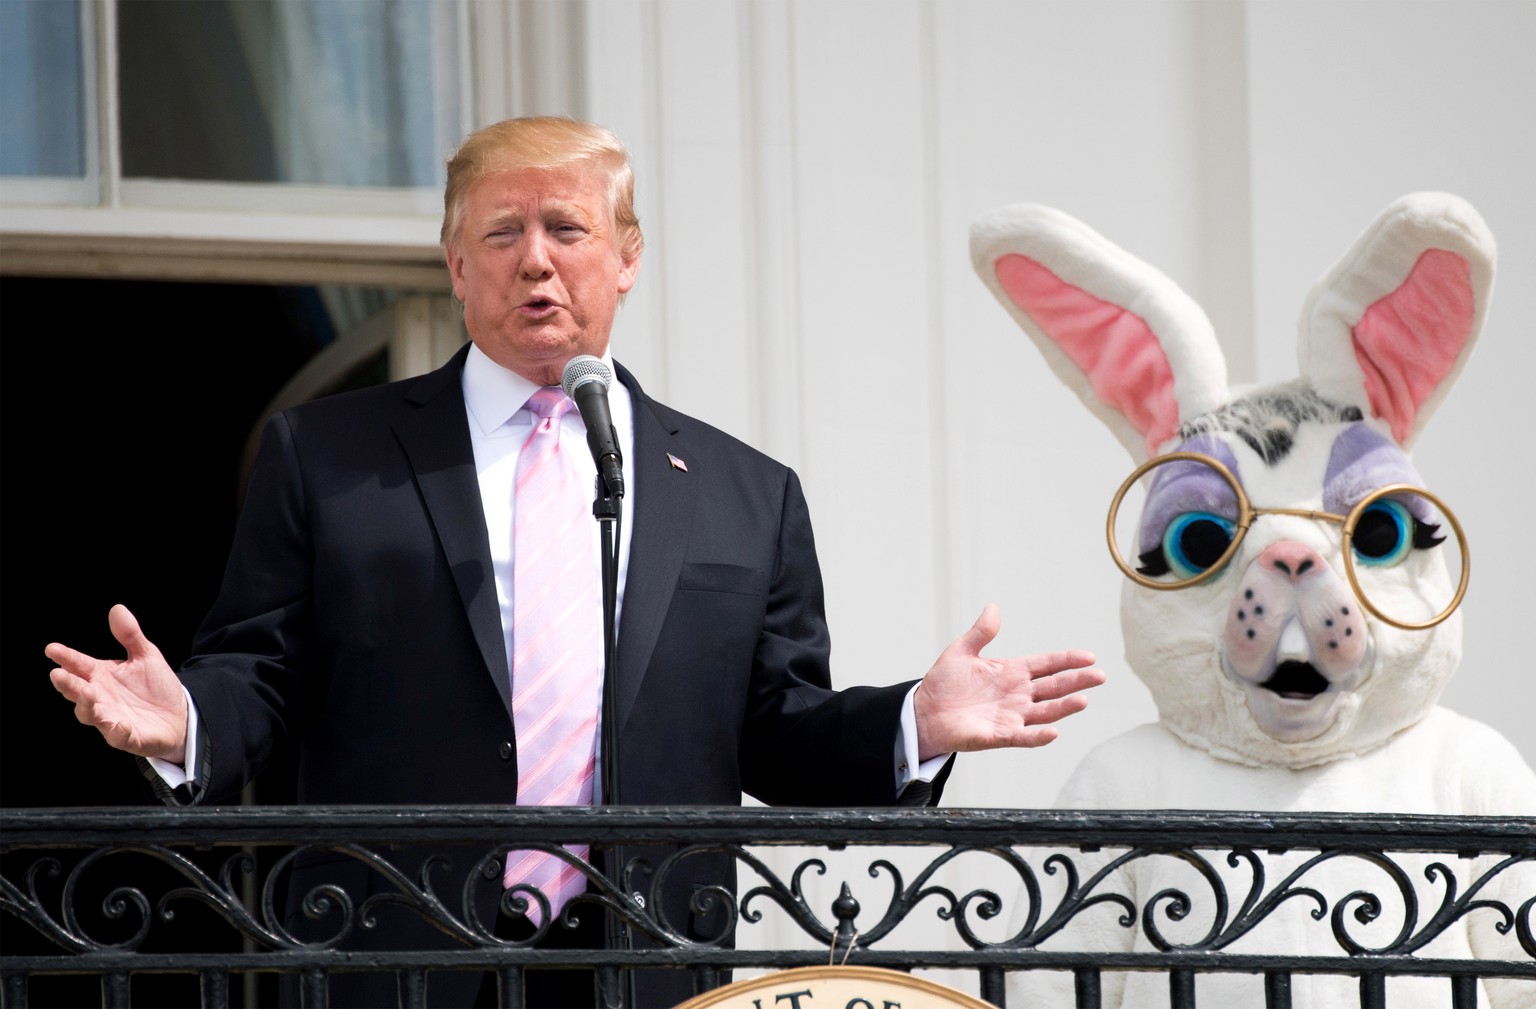 epa07521635 US President Donald J. Trump, accompanied by the Easter Bunny, delivers remarks at the White House Easter Egg Roll at the White House in Washington, DC, USA, on 22 April 2019. Some of this ...